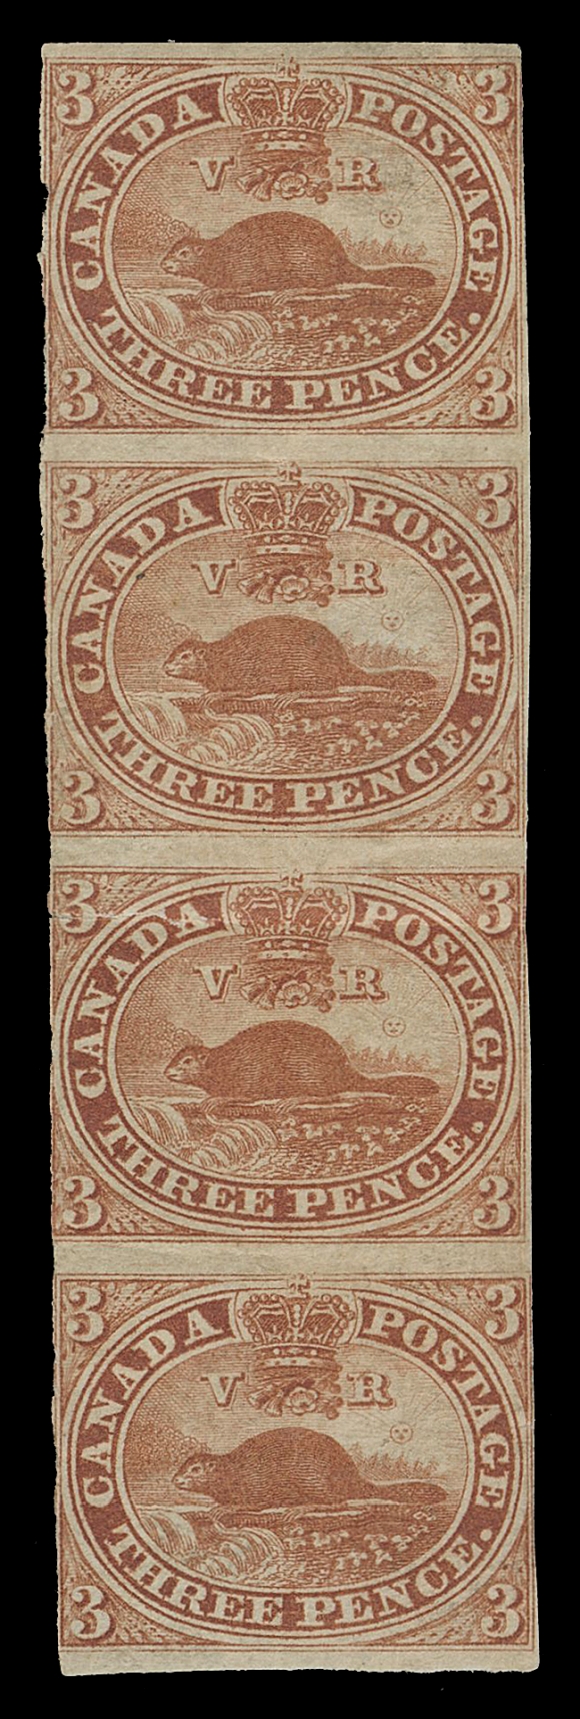 CANADA -  2 PENCE  4a,A rare mint strip of four, somewhat irregular margin at left just touching design or frameline, bends and a broken crease which has partly separated on third stamp, overall Fine appearance with large part original gum. Very few mint OG multiples survive in any condition; 2012 Greene Foundation cert.